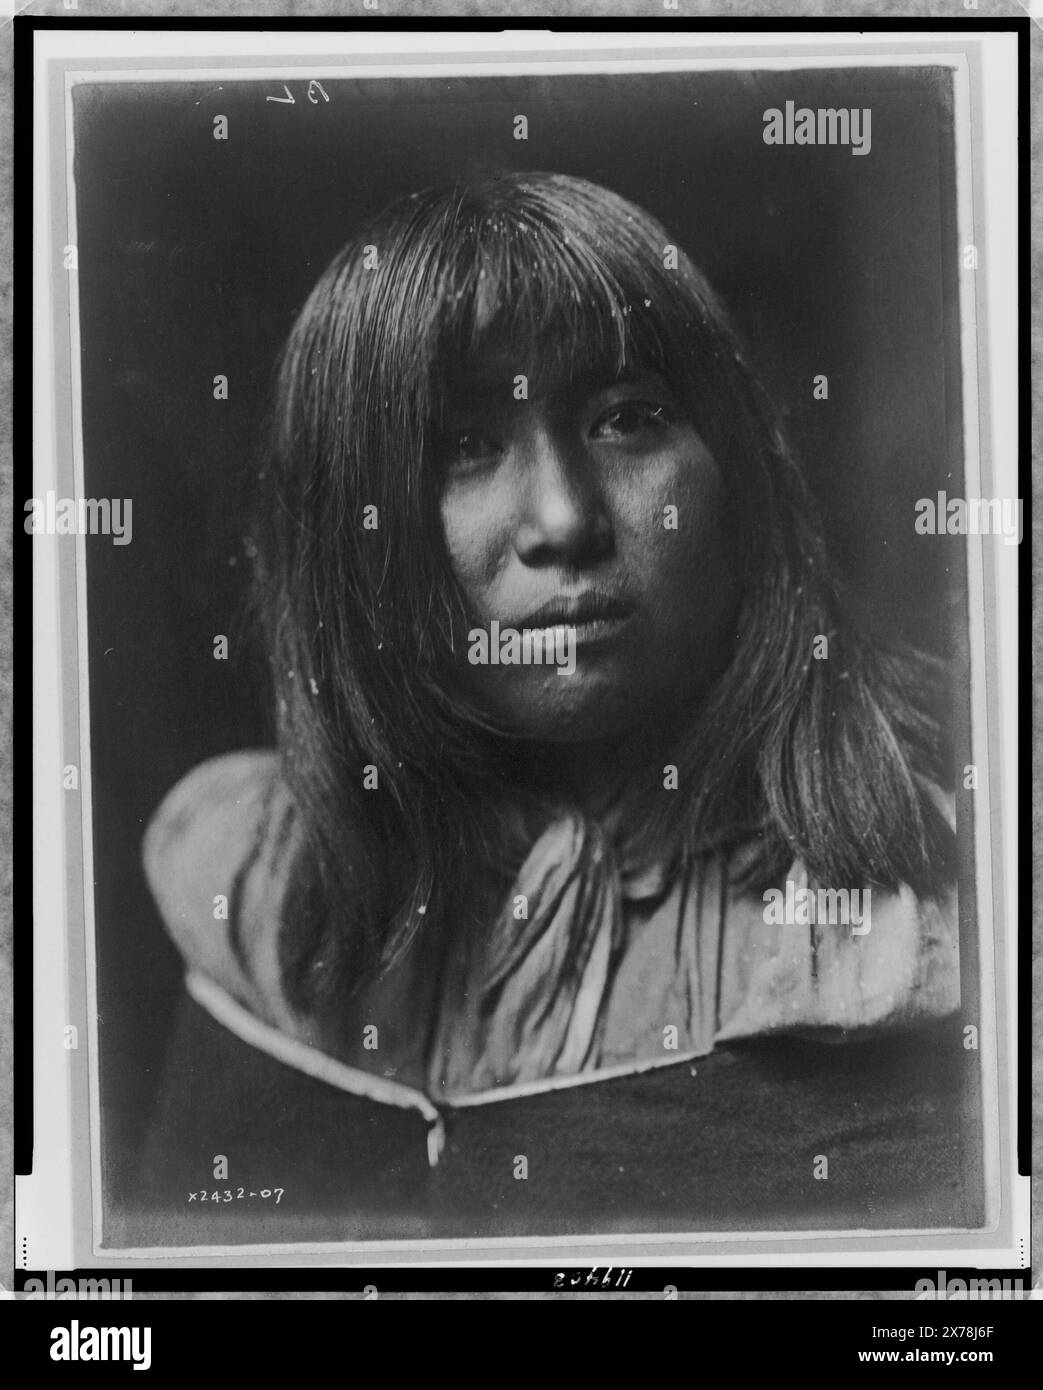 Tonovige Havasupai, Edward S. Curtis Collection ., Curtis no. 2432-07., Published in: The North American Indian / Edward S. Curtis. [Seattle, Wash.] : Edward S. Curtis, 1907-30, Suppl. v. 3, pl. 74.. Tonovíg?. , Indians of North America, Clothing & dress, 1900-1910. , Havasupai Indians, Clothing & dress, 1900-1910. Stock Photo